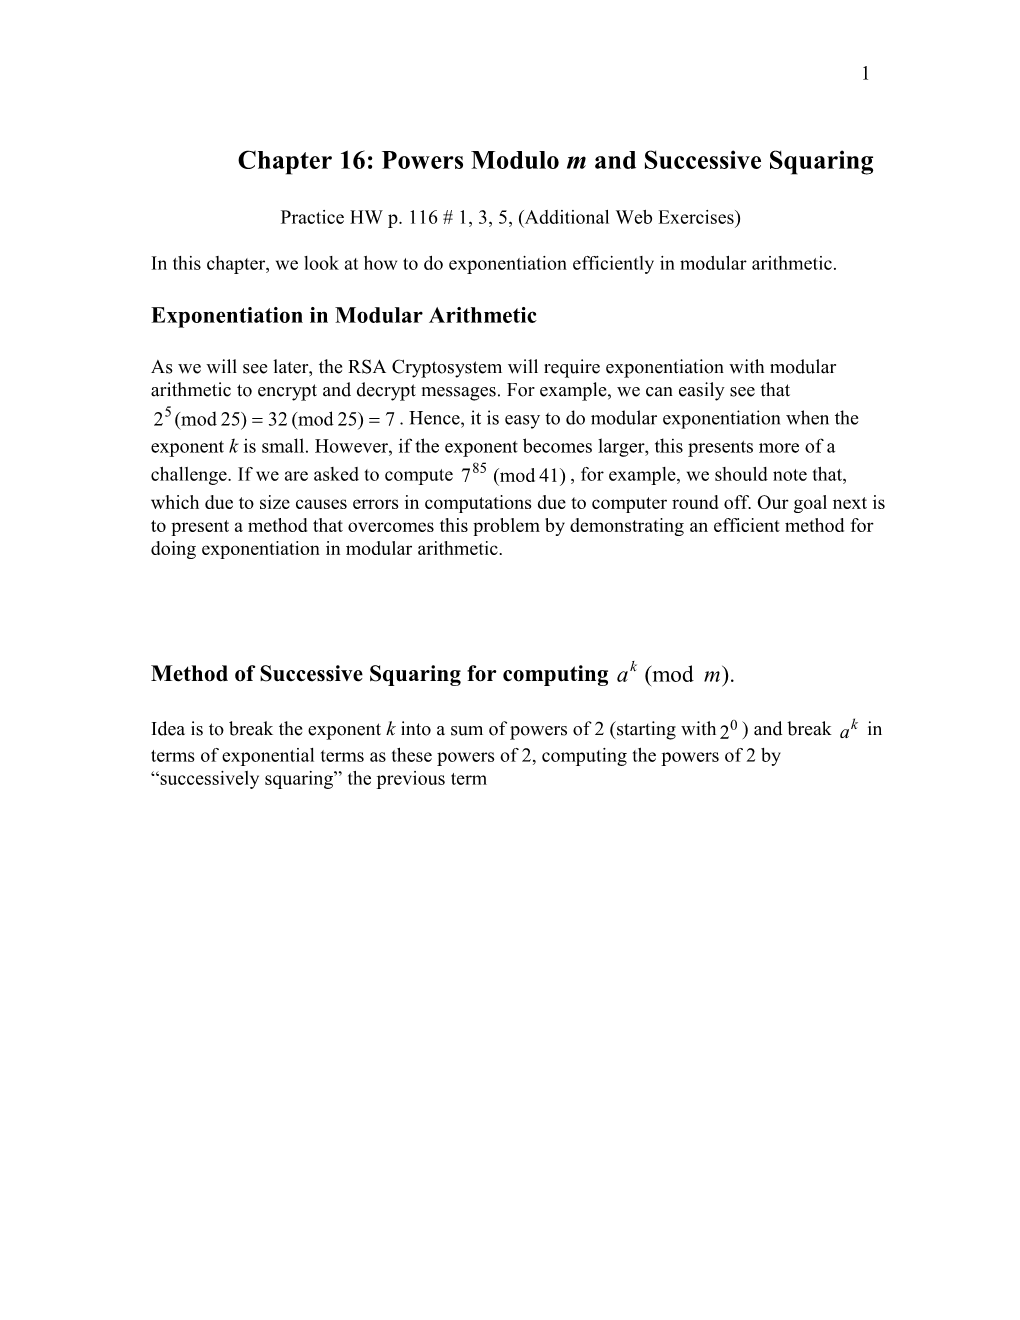 Chapter 16: Powers Modulo M and Successive Squaring